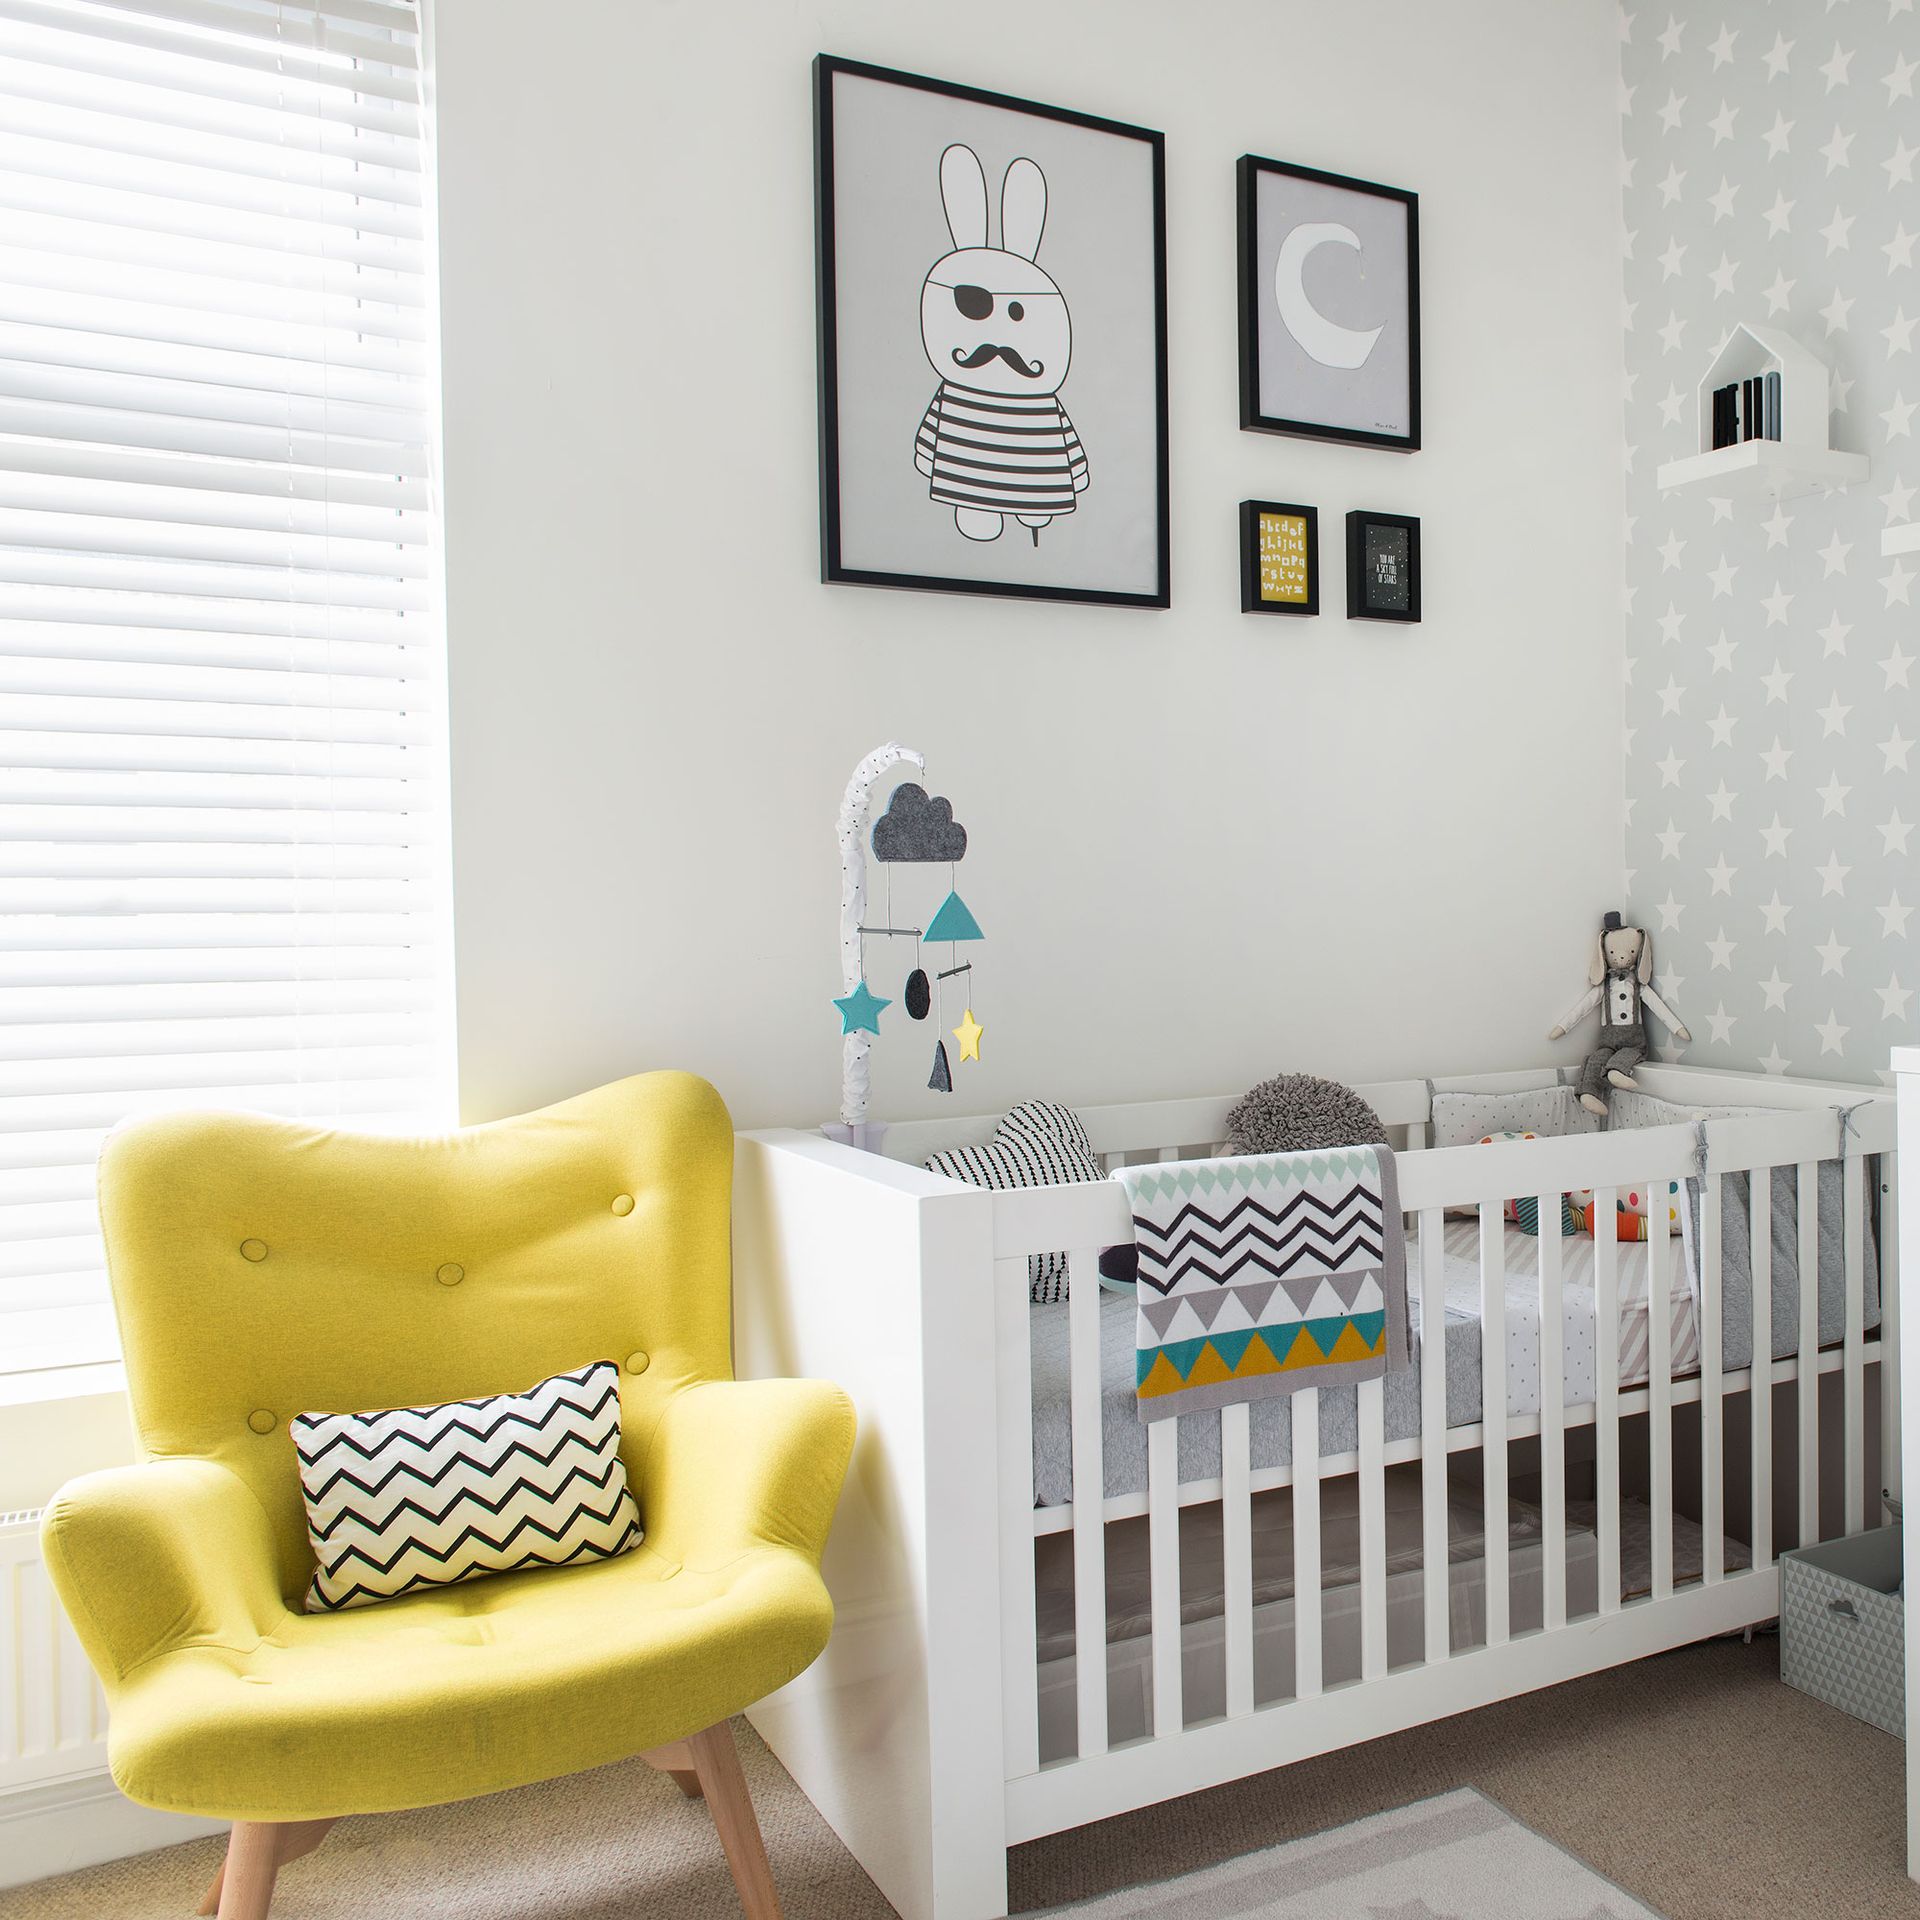 <p>                     'Shutters are an important consideration for nursery ideas as they help parents control light, temperature, volume and privacy,' says Sally Denyer, Digital Marketing Manager, Shutterly Fabulous.                   </p>                                      <p>                     'Café style shutters, are a nice option as they allow the light come in through the top half of the window, whilst giving control over the lower half. Alternatively, solid wood shutters can be closed to create complete darkness, which is perfect for putting children down for daytime naps.'                   </p>                                      <p>                     'As well as offering light and temperature control, shutters are also the safest window treatment for nurseries, as they also have no cords or pullies, which present a hazard for children.                   </p>